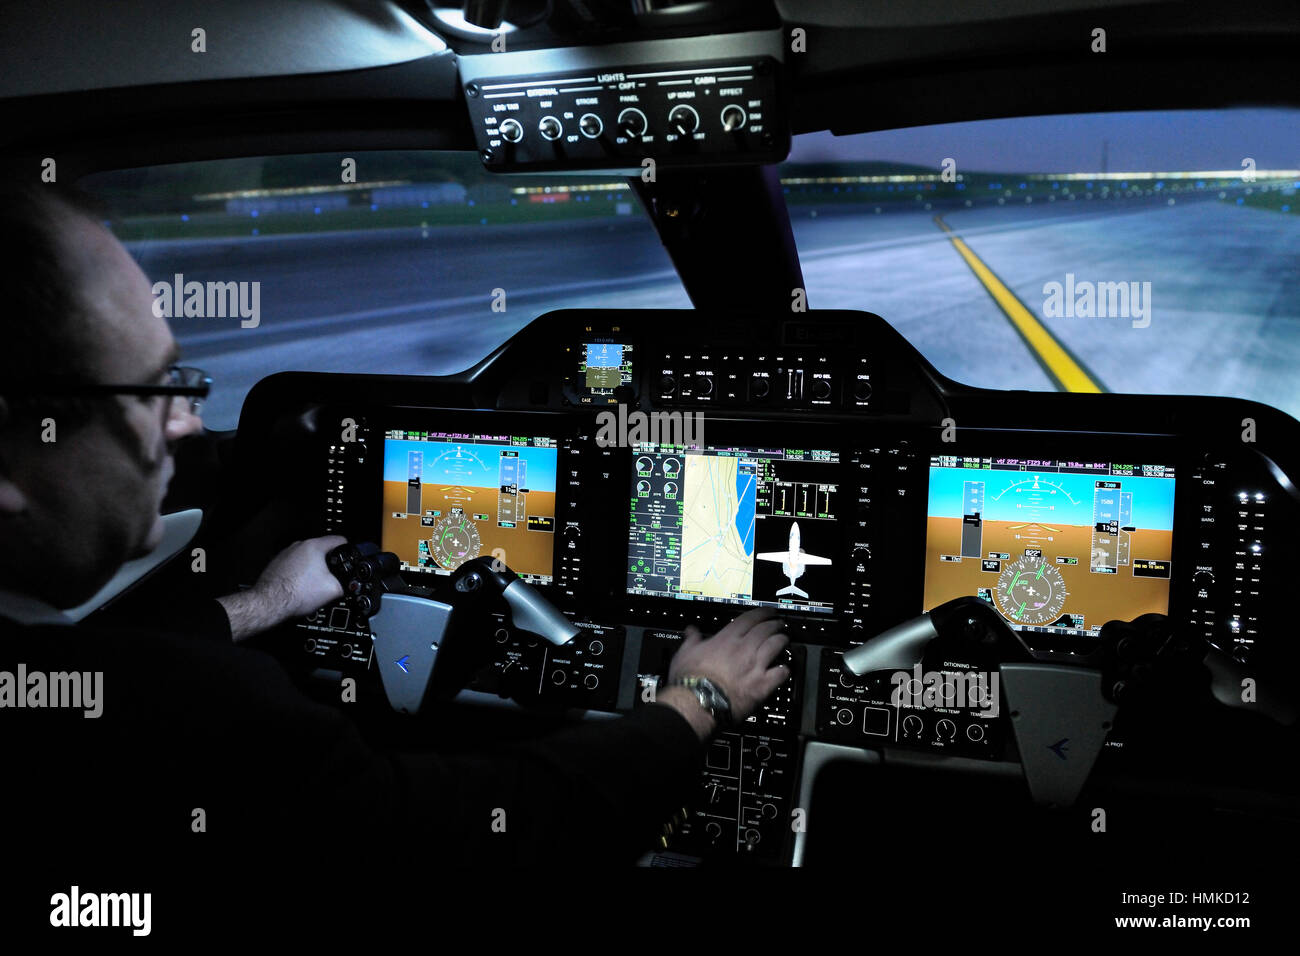 pilot in Embraer Phenom 100 cockpit-simulator CAE 5000 series at CAE Burgess Hill, UK training centre simulating taxiing at Stock Photo